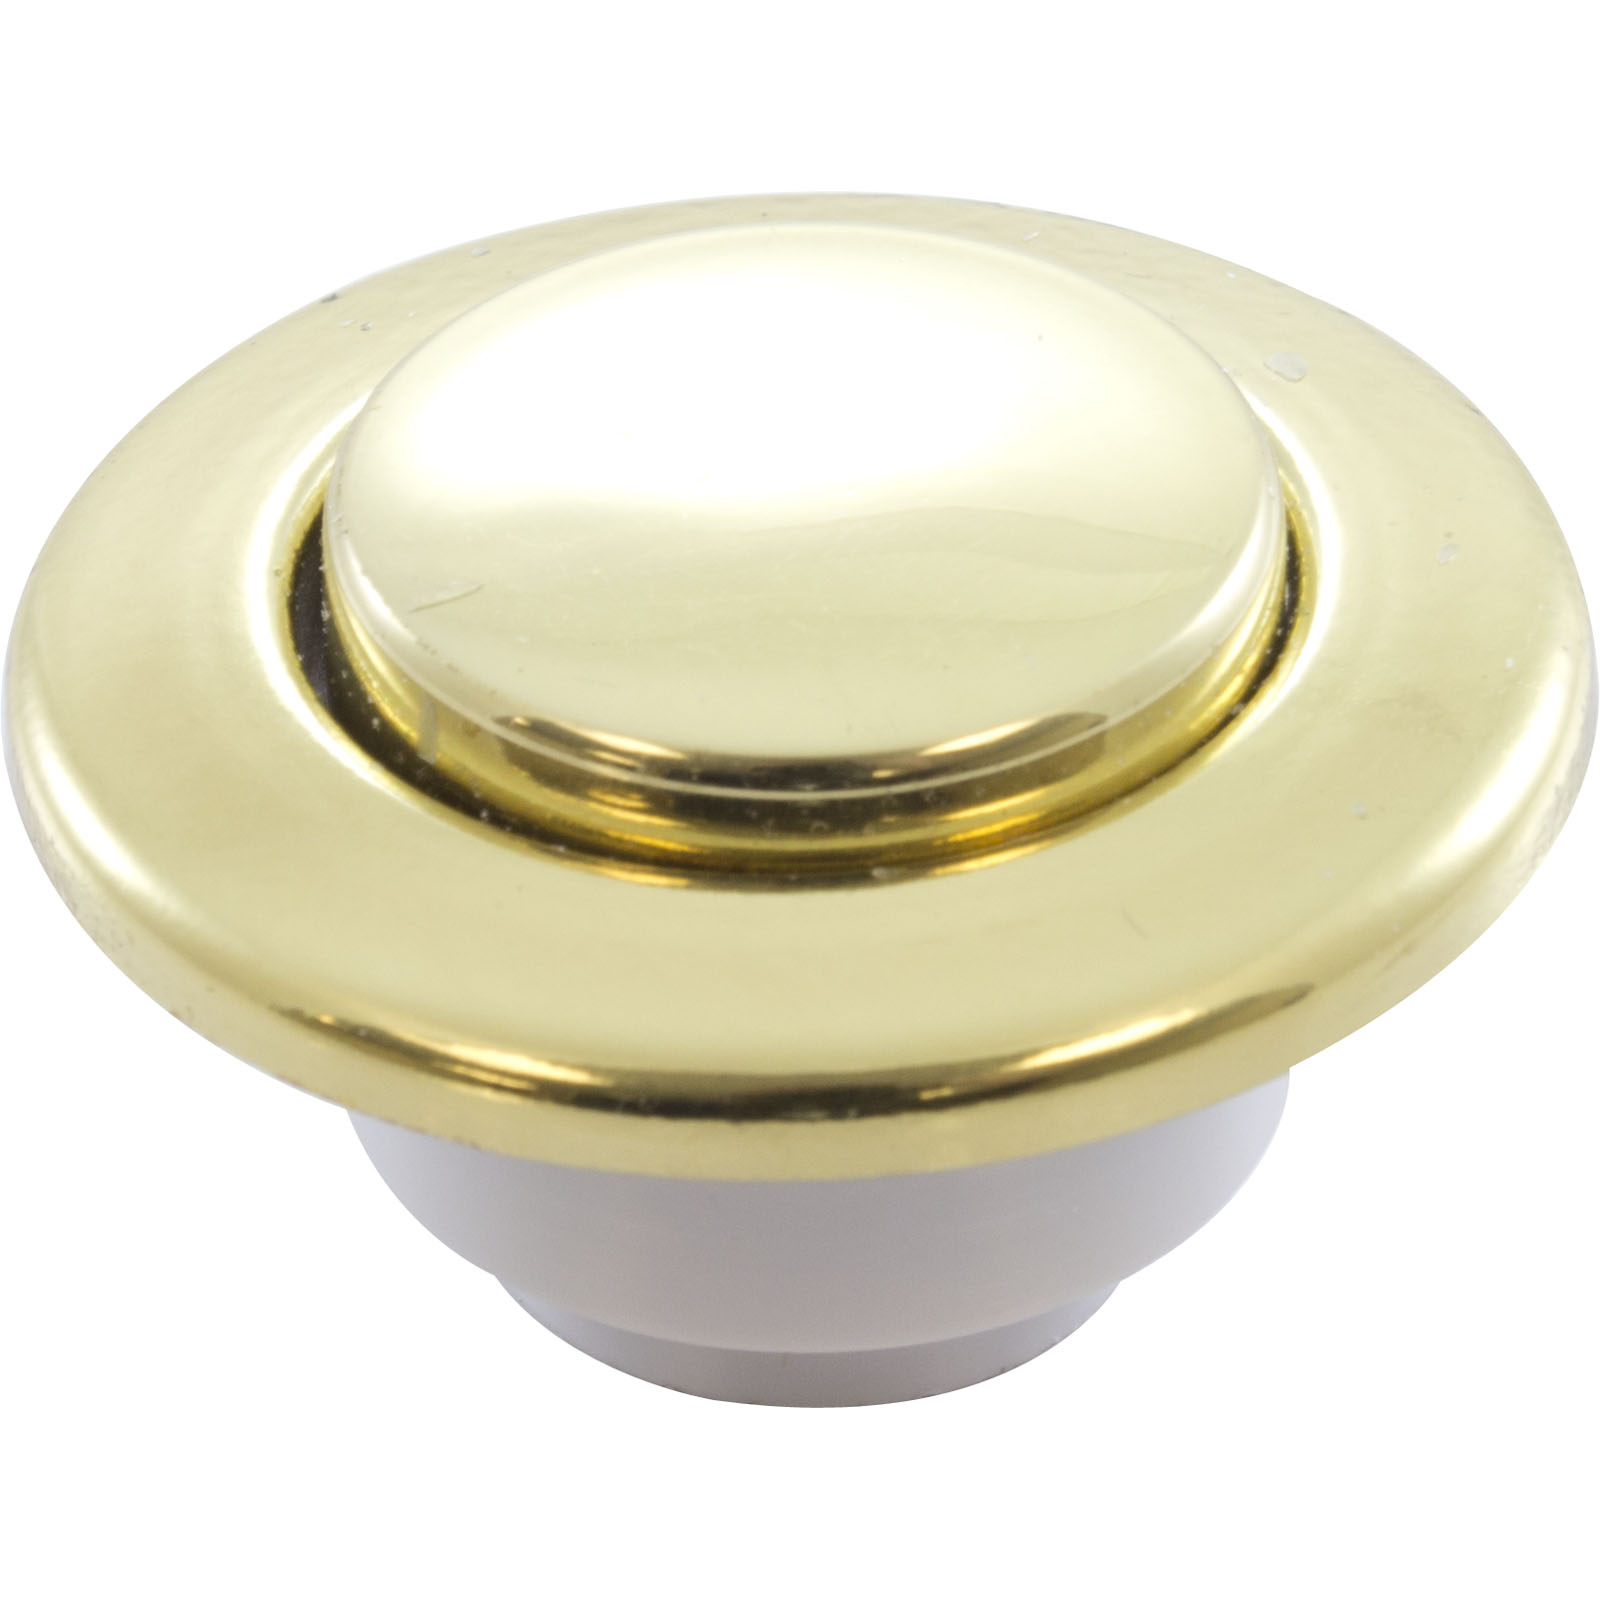 Picture of Trim Kit, Balboa Water Group/GG, Polished Brass